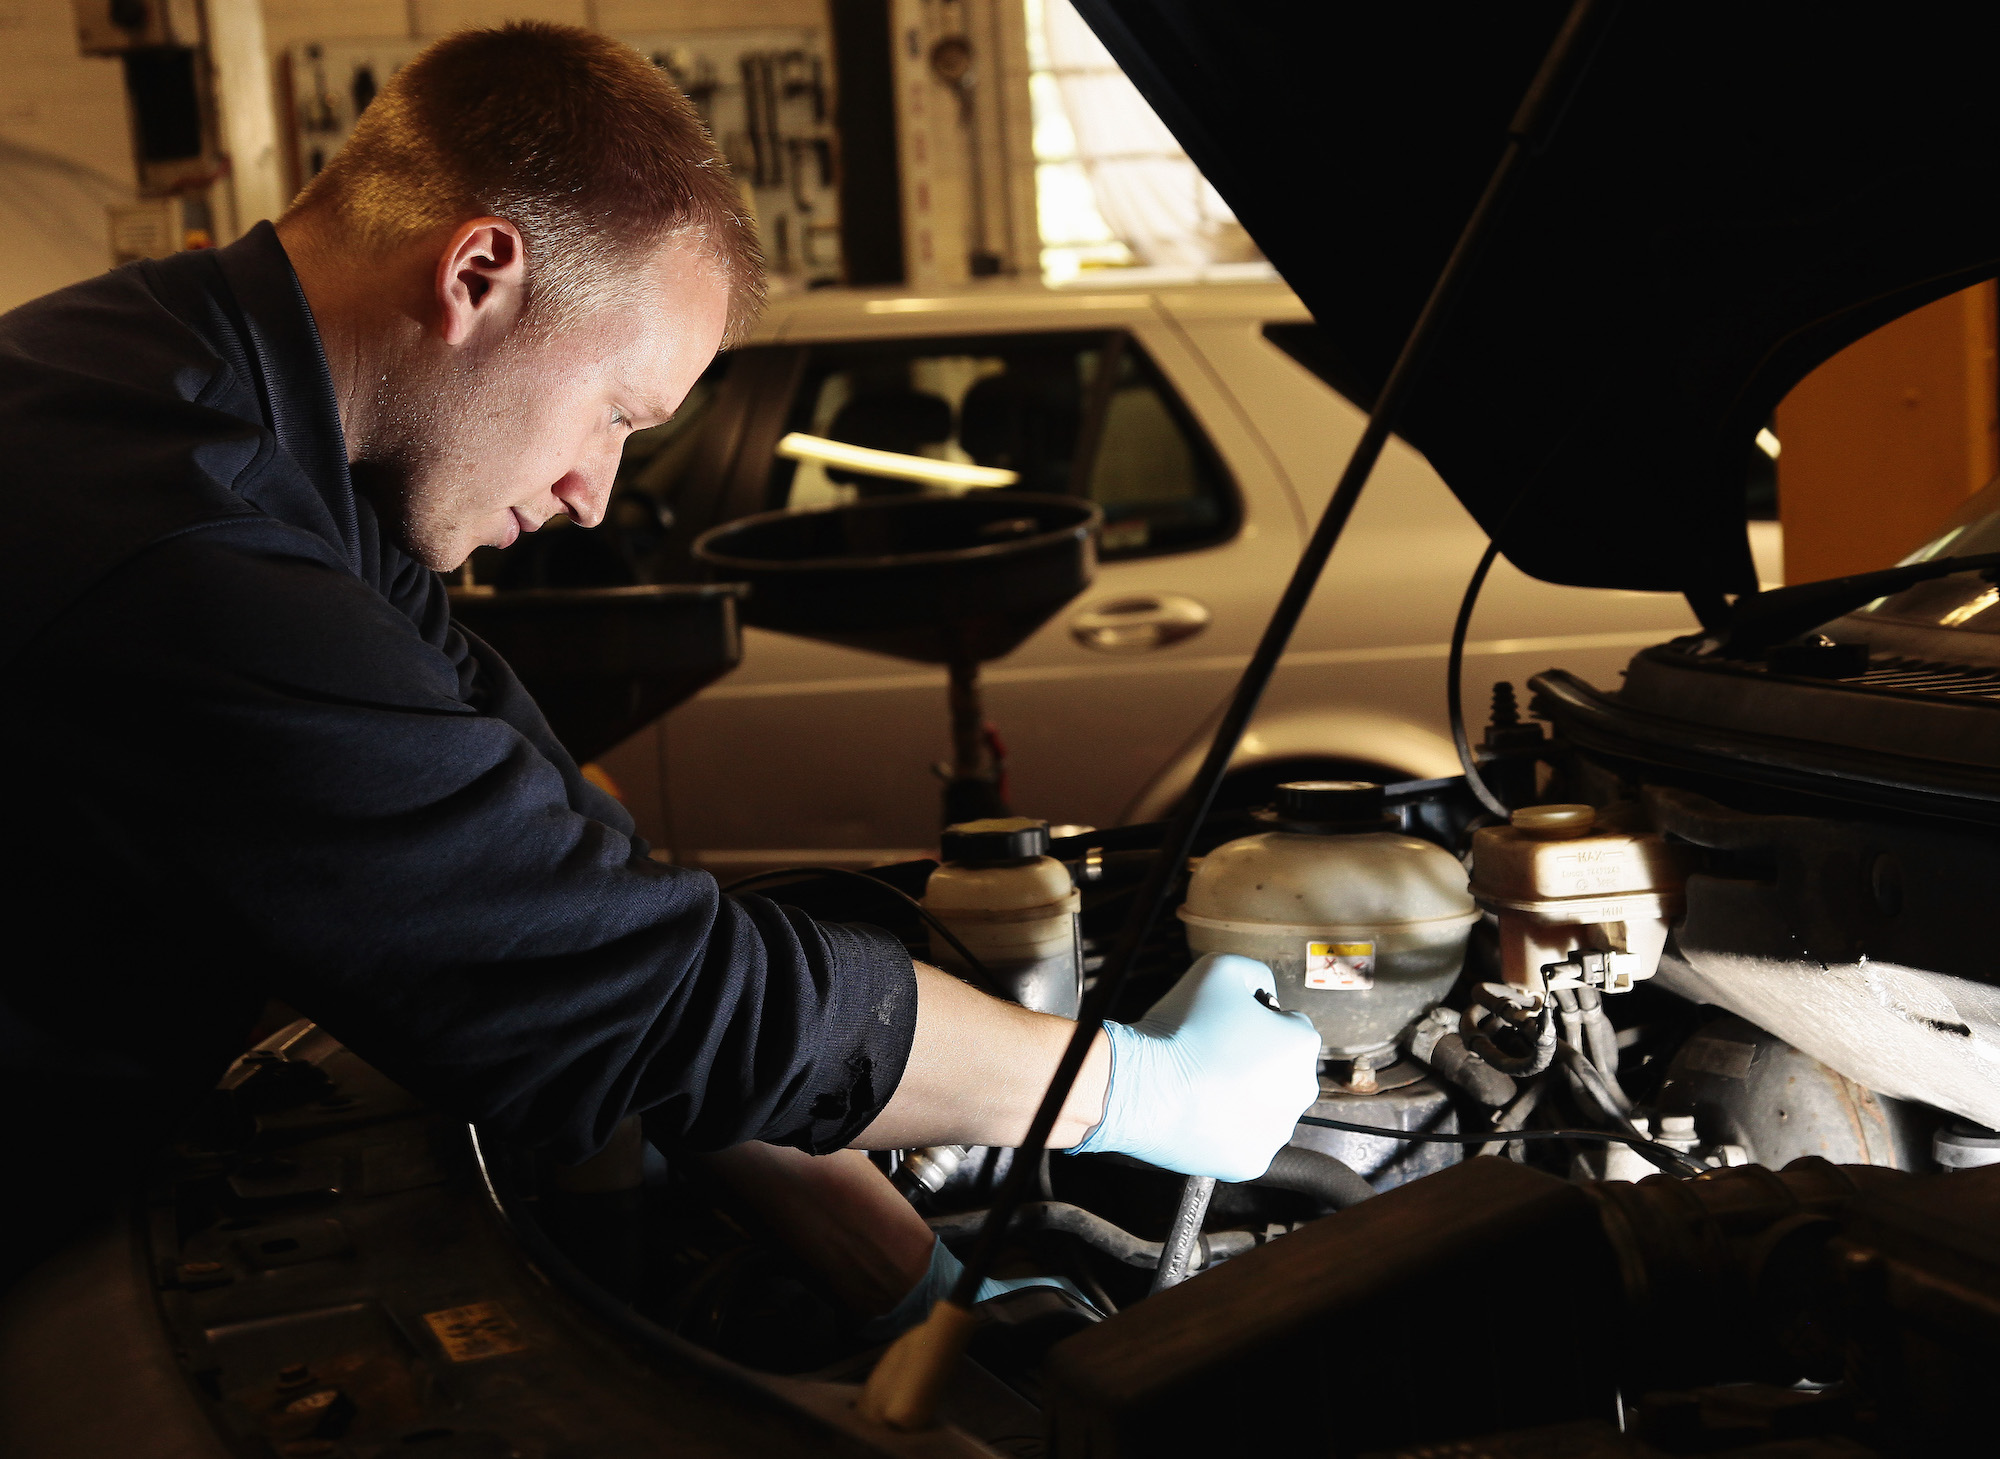 A mechanic works on a car in a garage